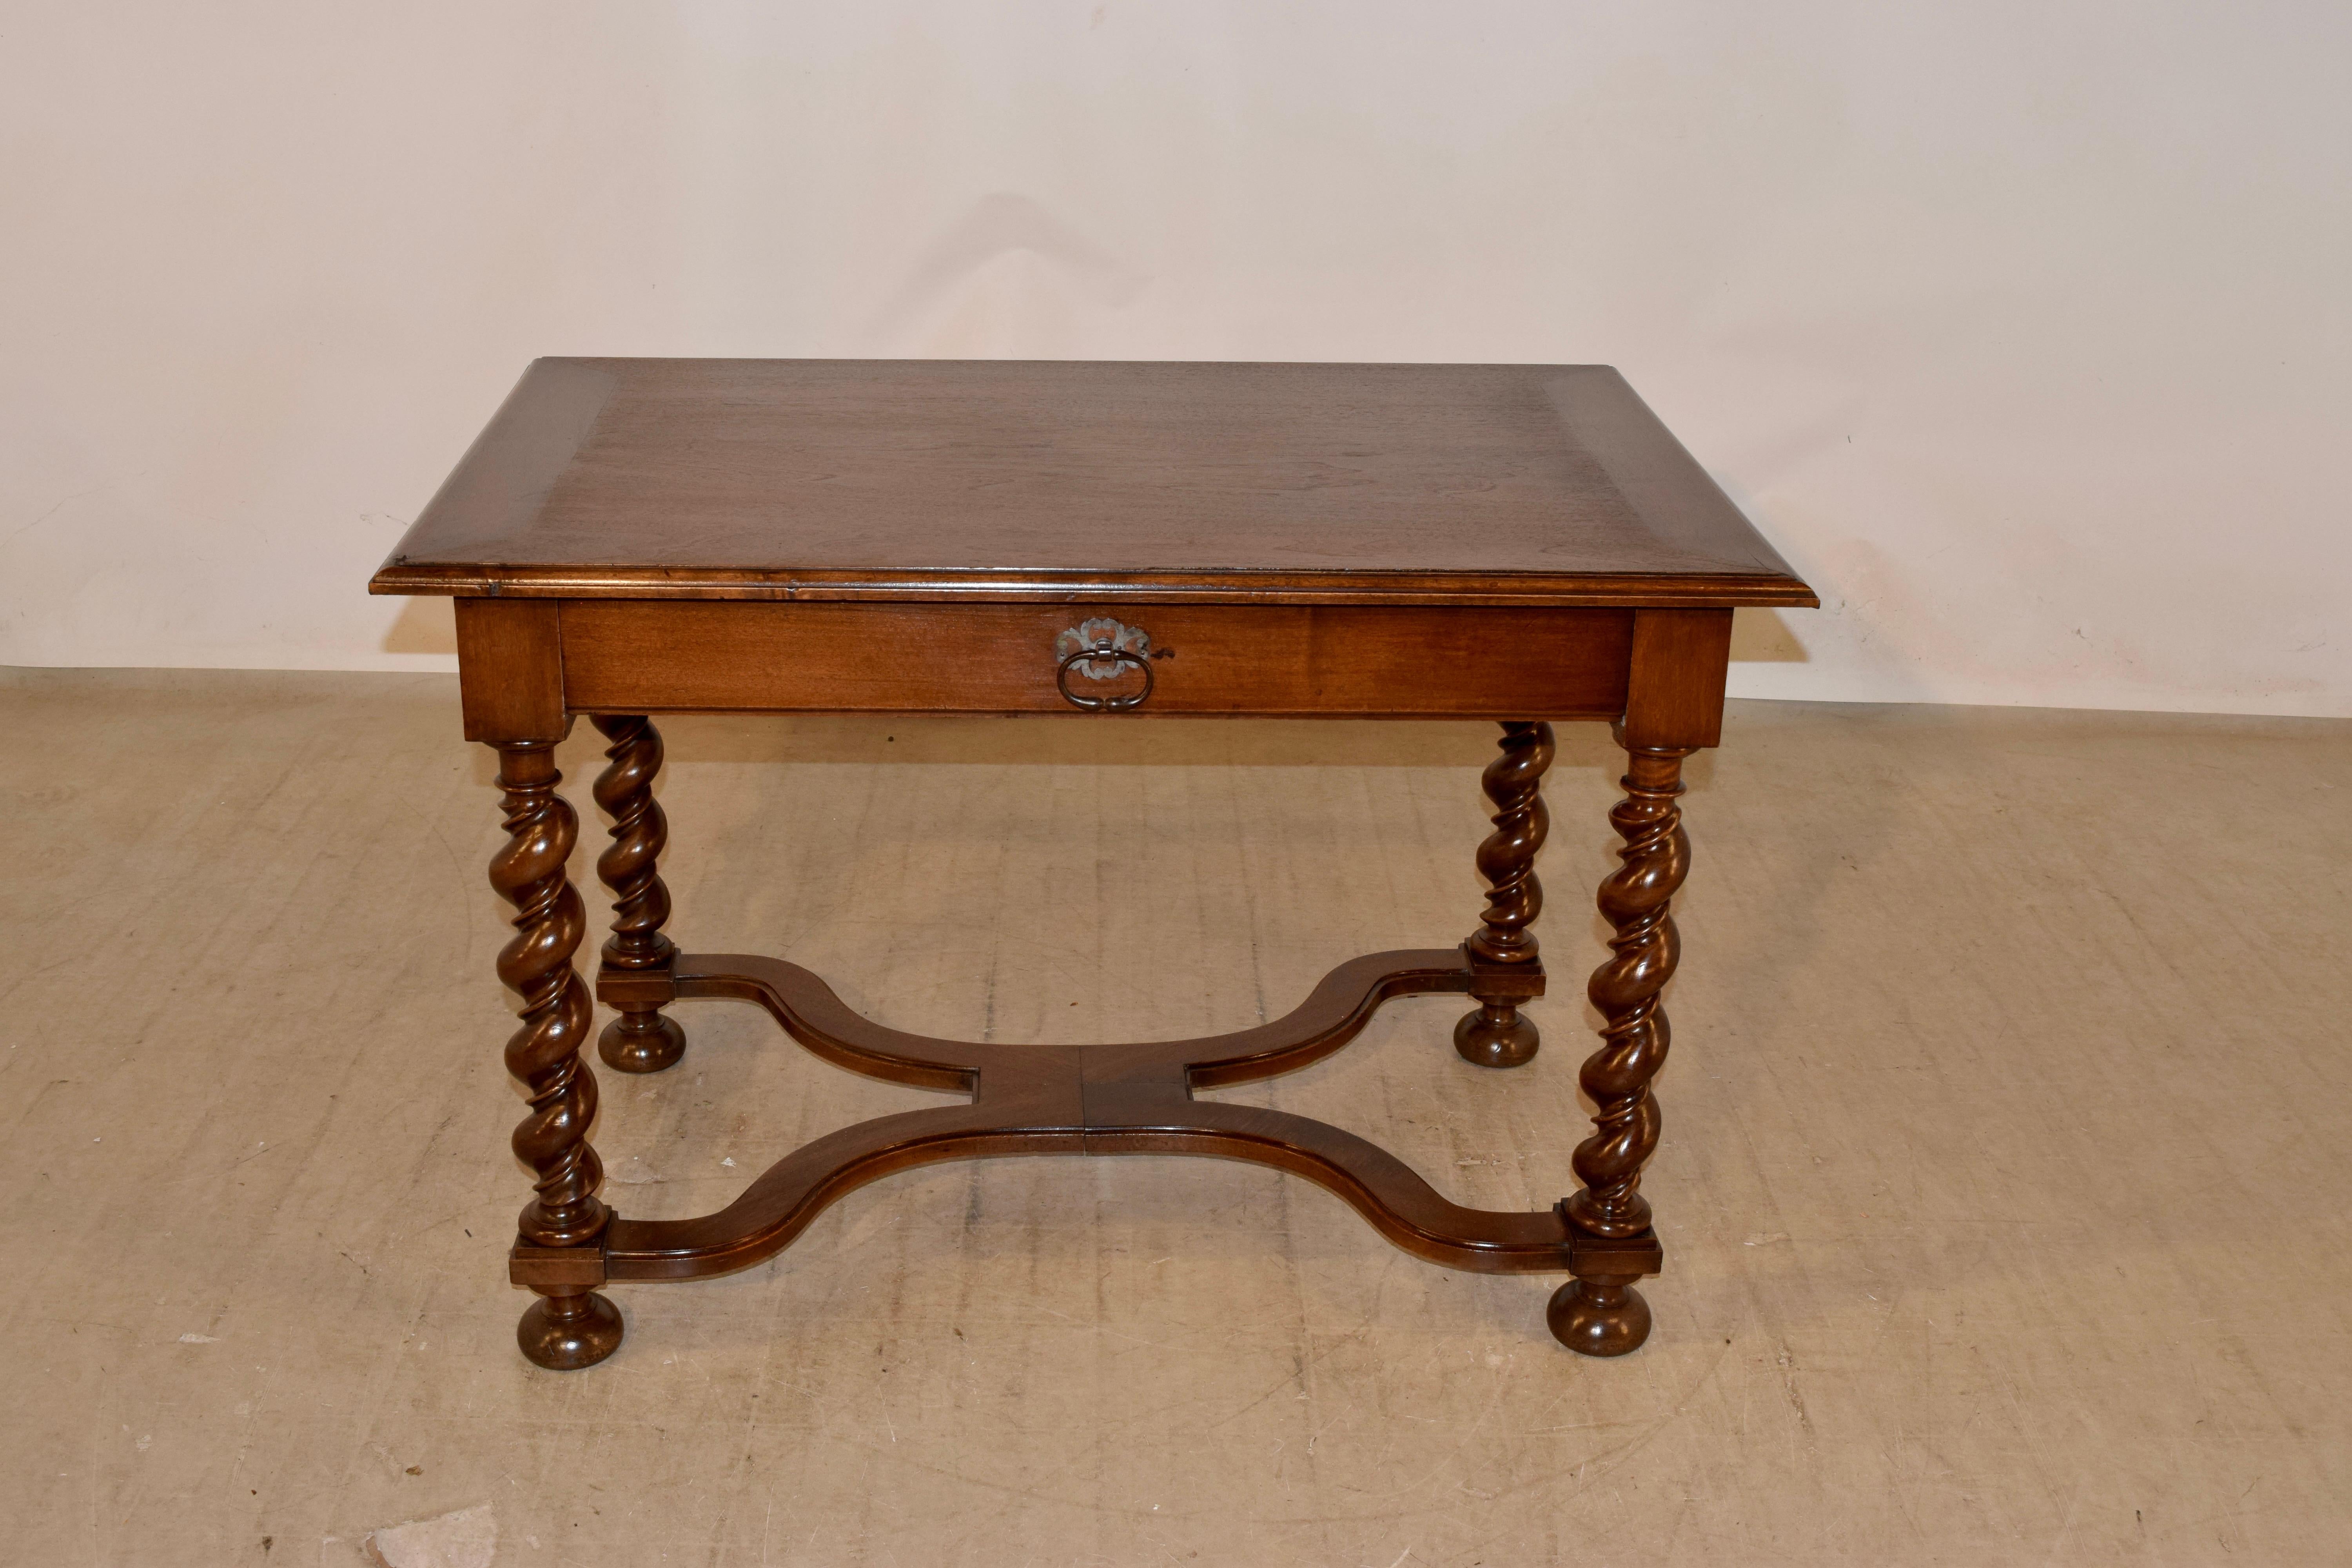 18th century walnut side table from France. The top is banded and has a lovely beveled edge, over a simple apron containing a single drawer in the front. The table is supported on hand turned vine barley twist legs and are joined by serpentine